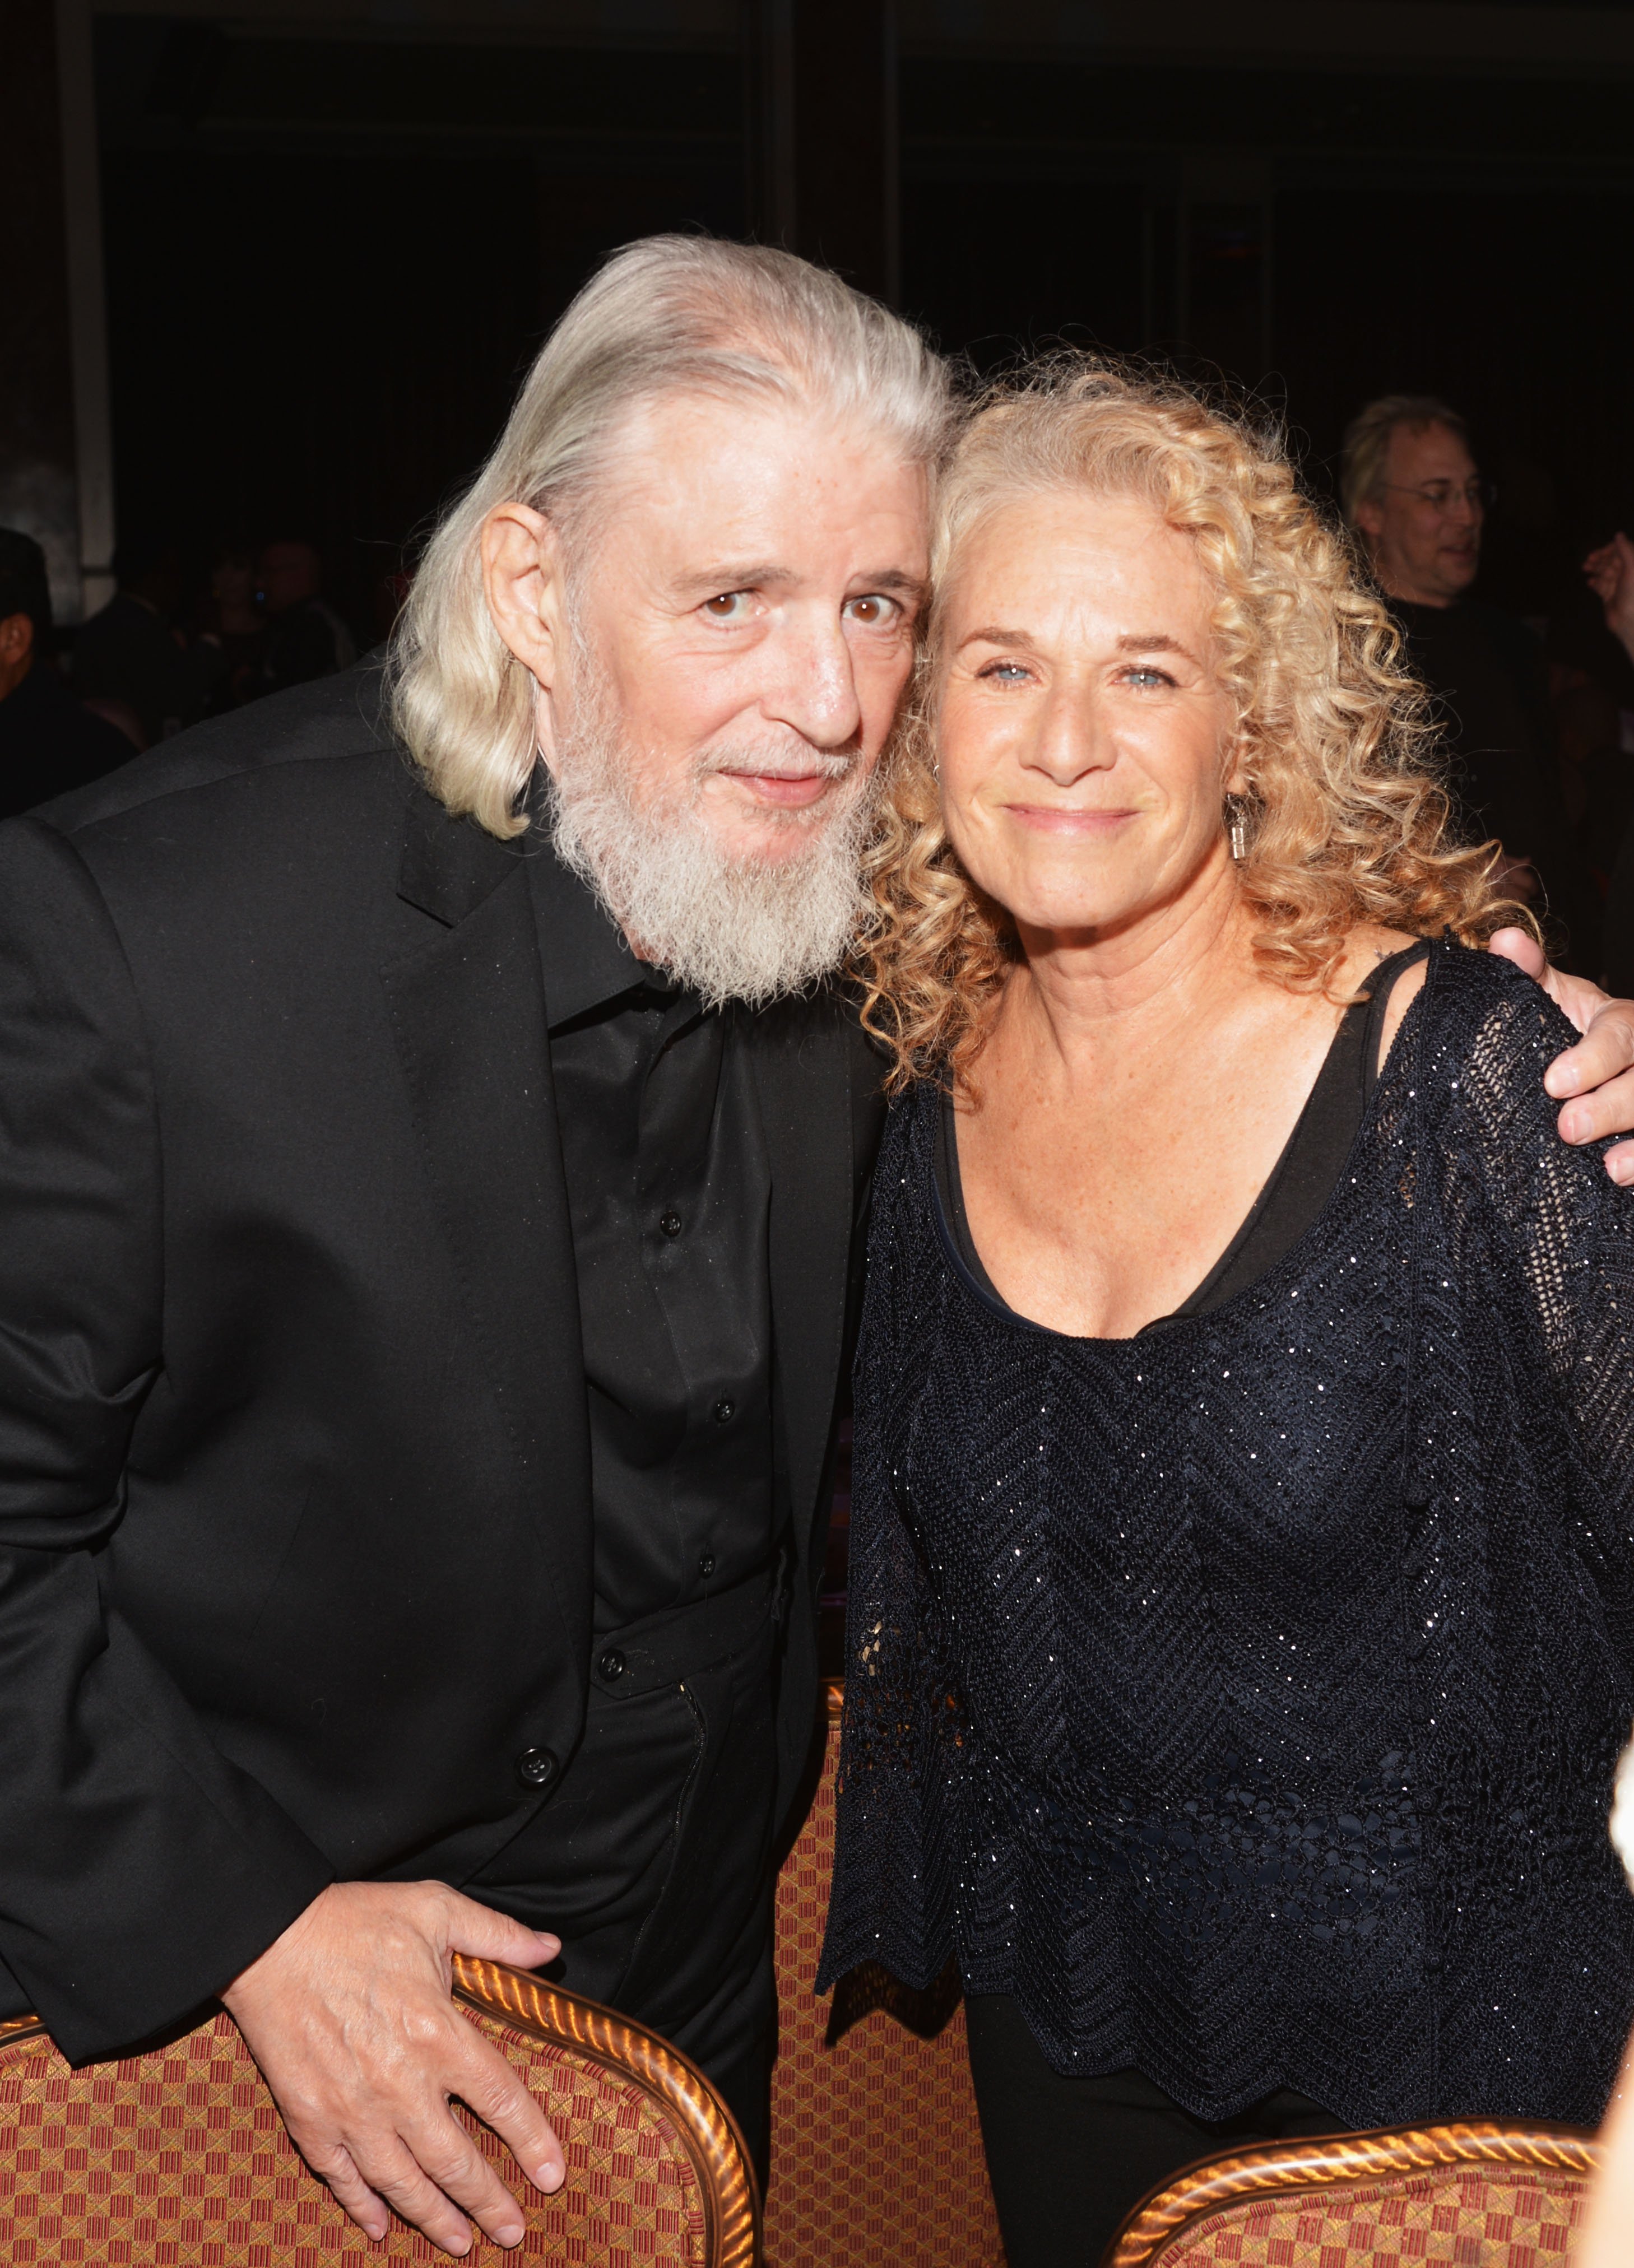 Gerry Goffin and Carole King at the Beverly Wilshire Four Seasons Hotel on May 15, 2012 in Beverly Hills, California | Source: Getty Images